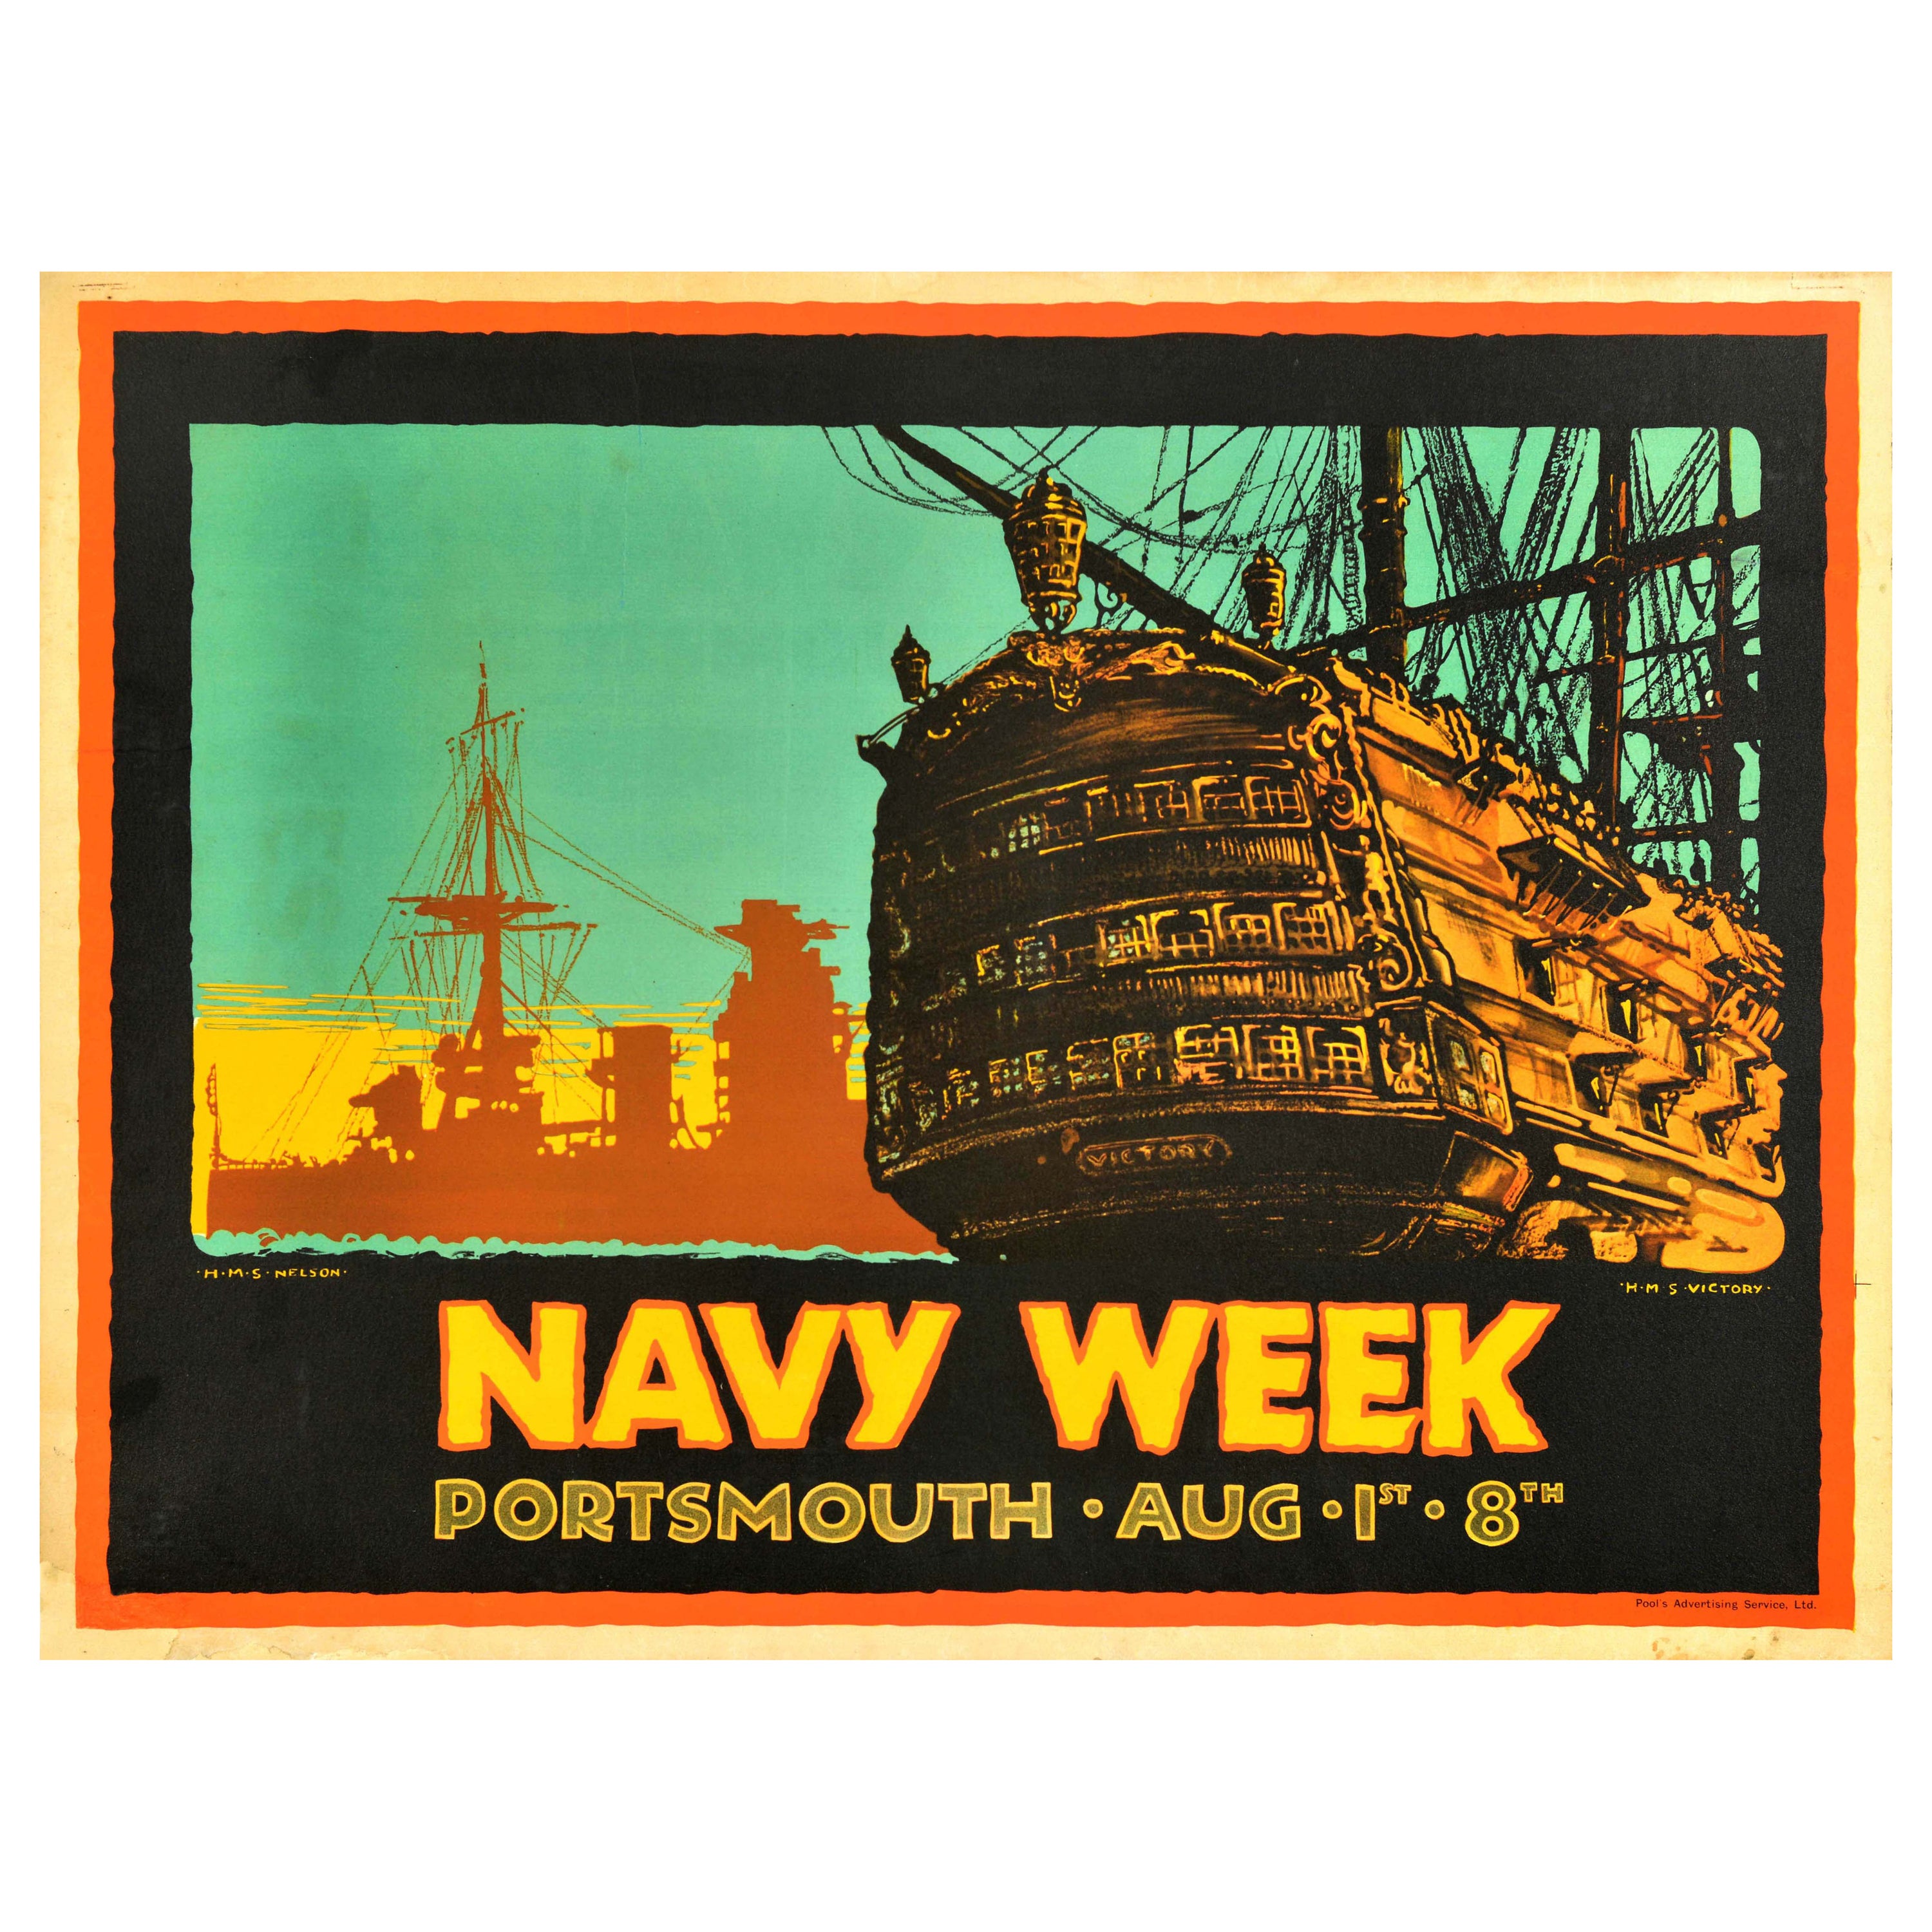 Original Vintage Advertising Poster Navy Week Portsmouth HMS Nelson Victory Ship